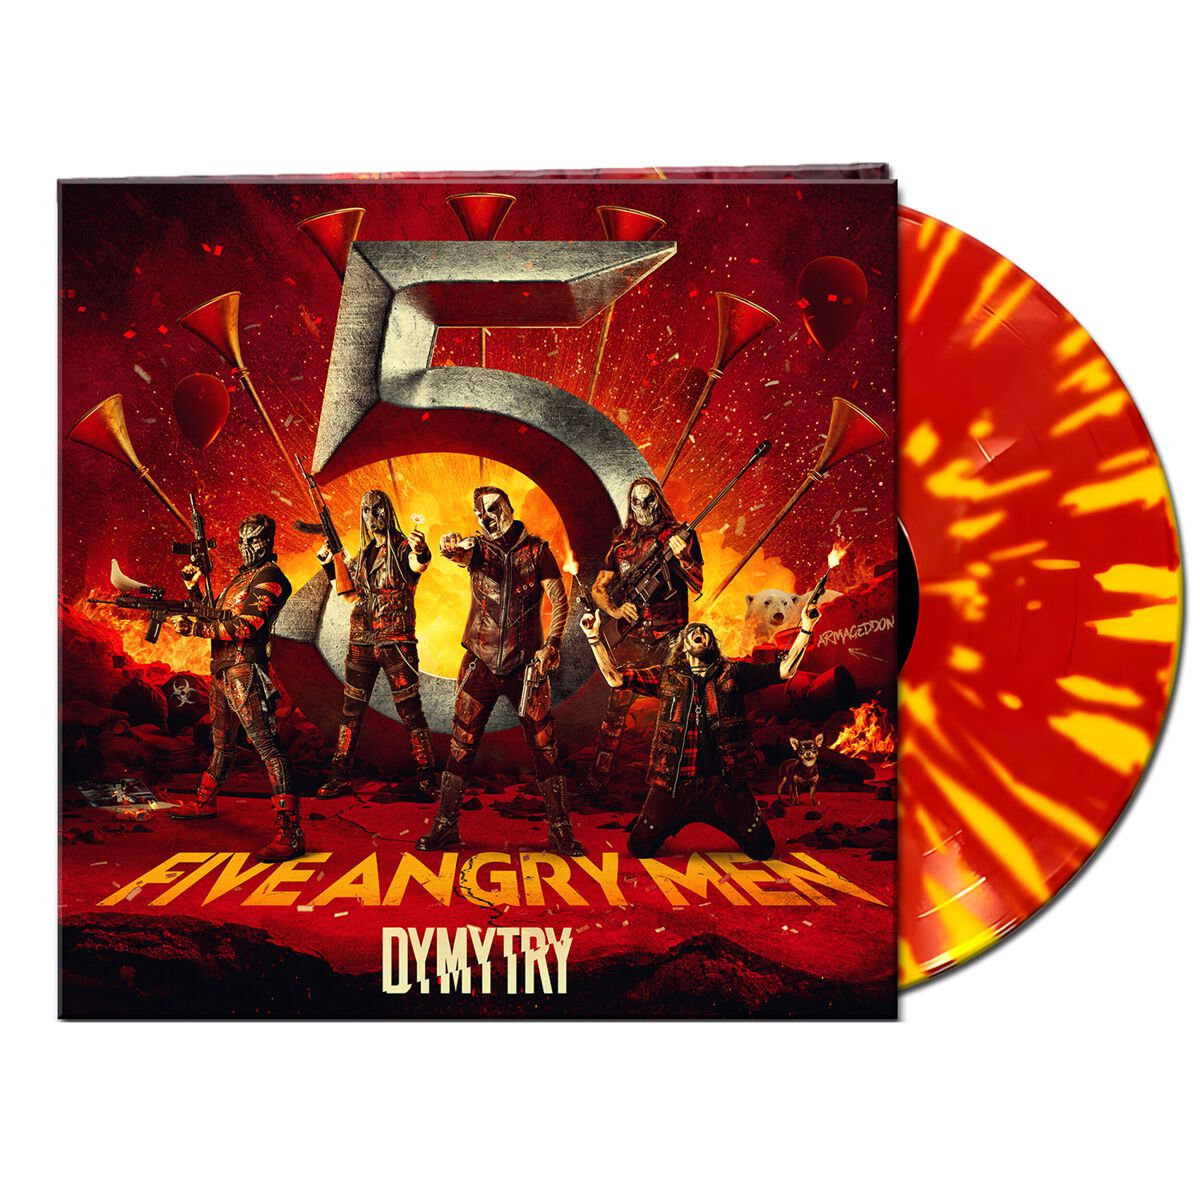 Five angry men von Dymytry - LP (Coloured, Gatefold, Limited Edition)